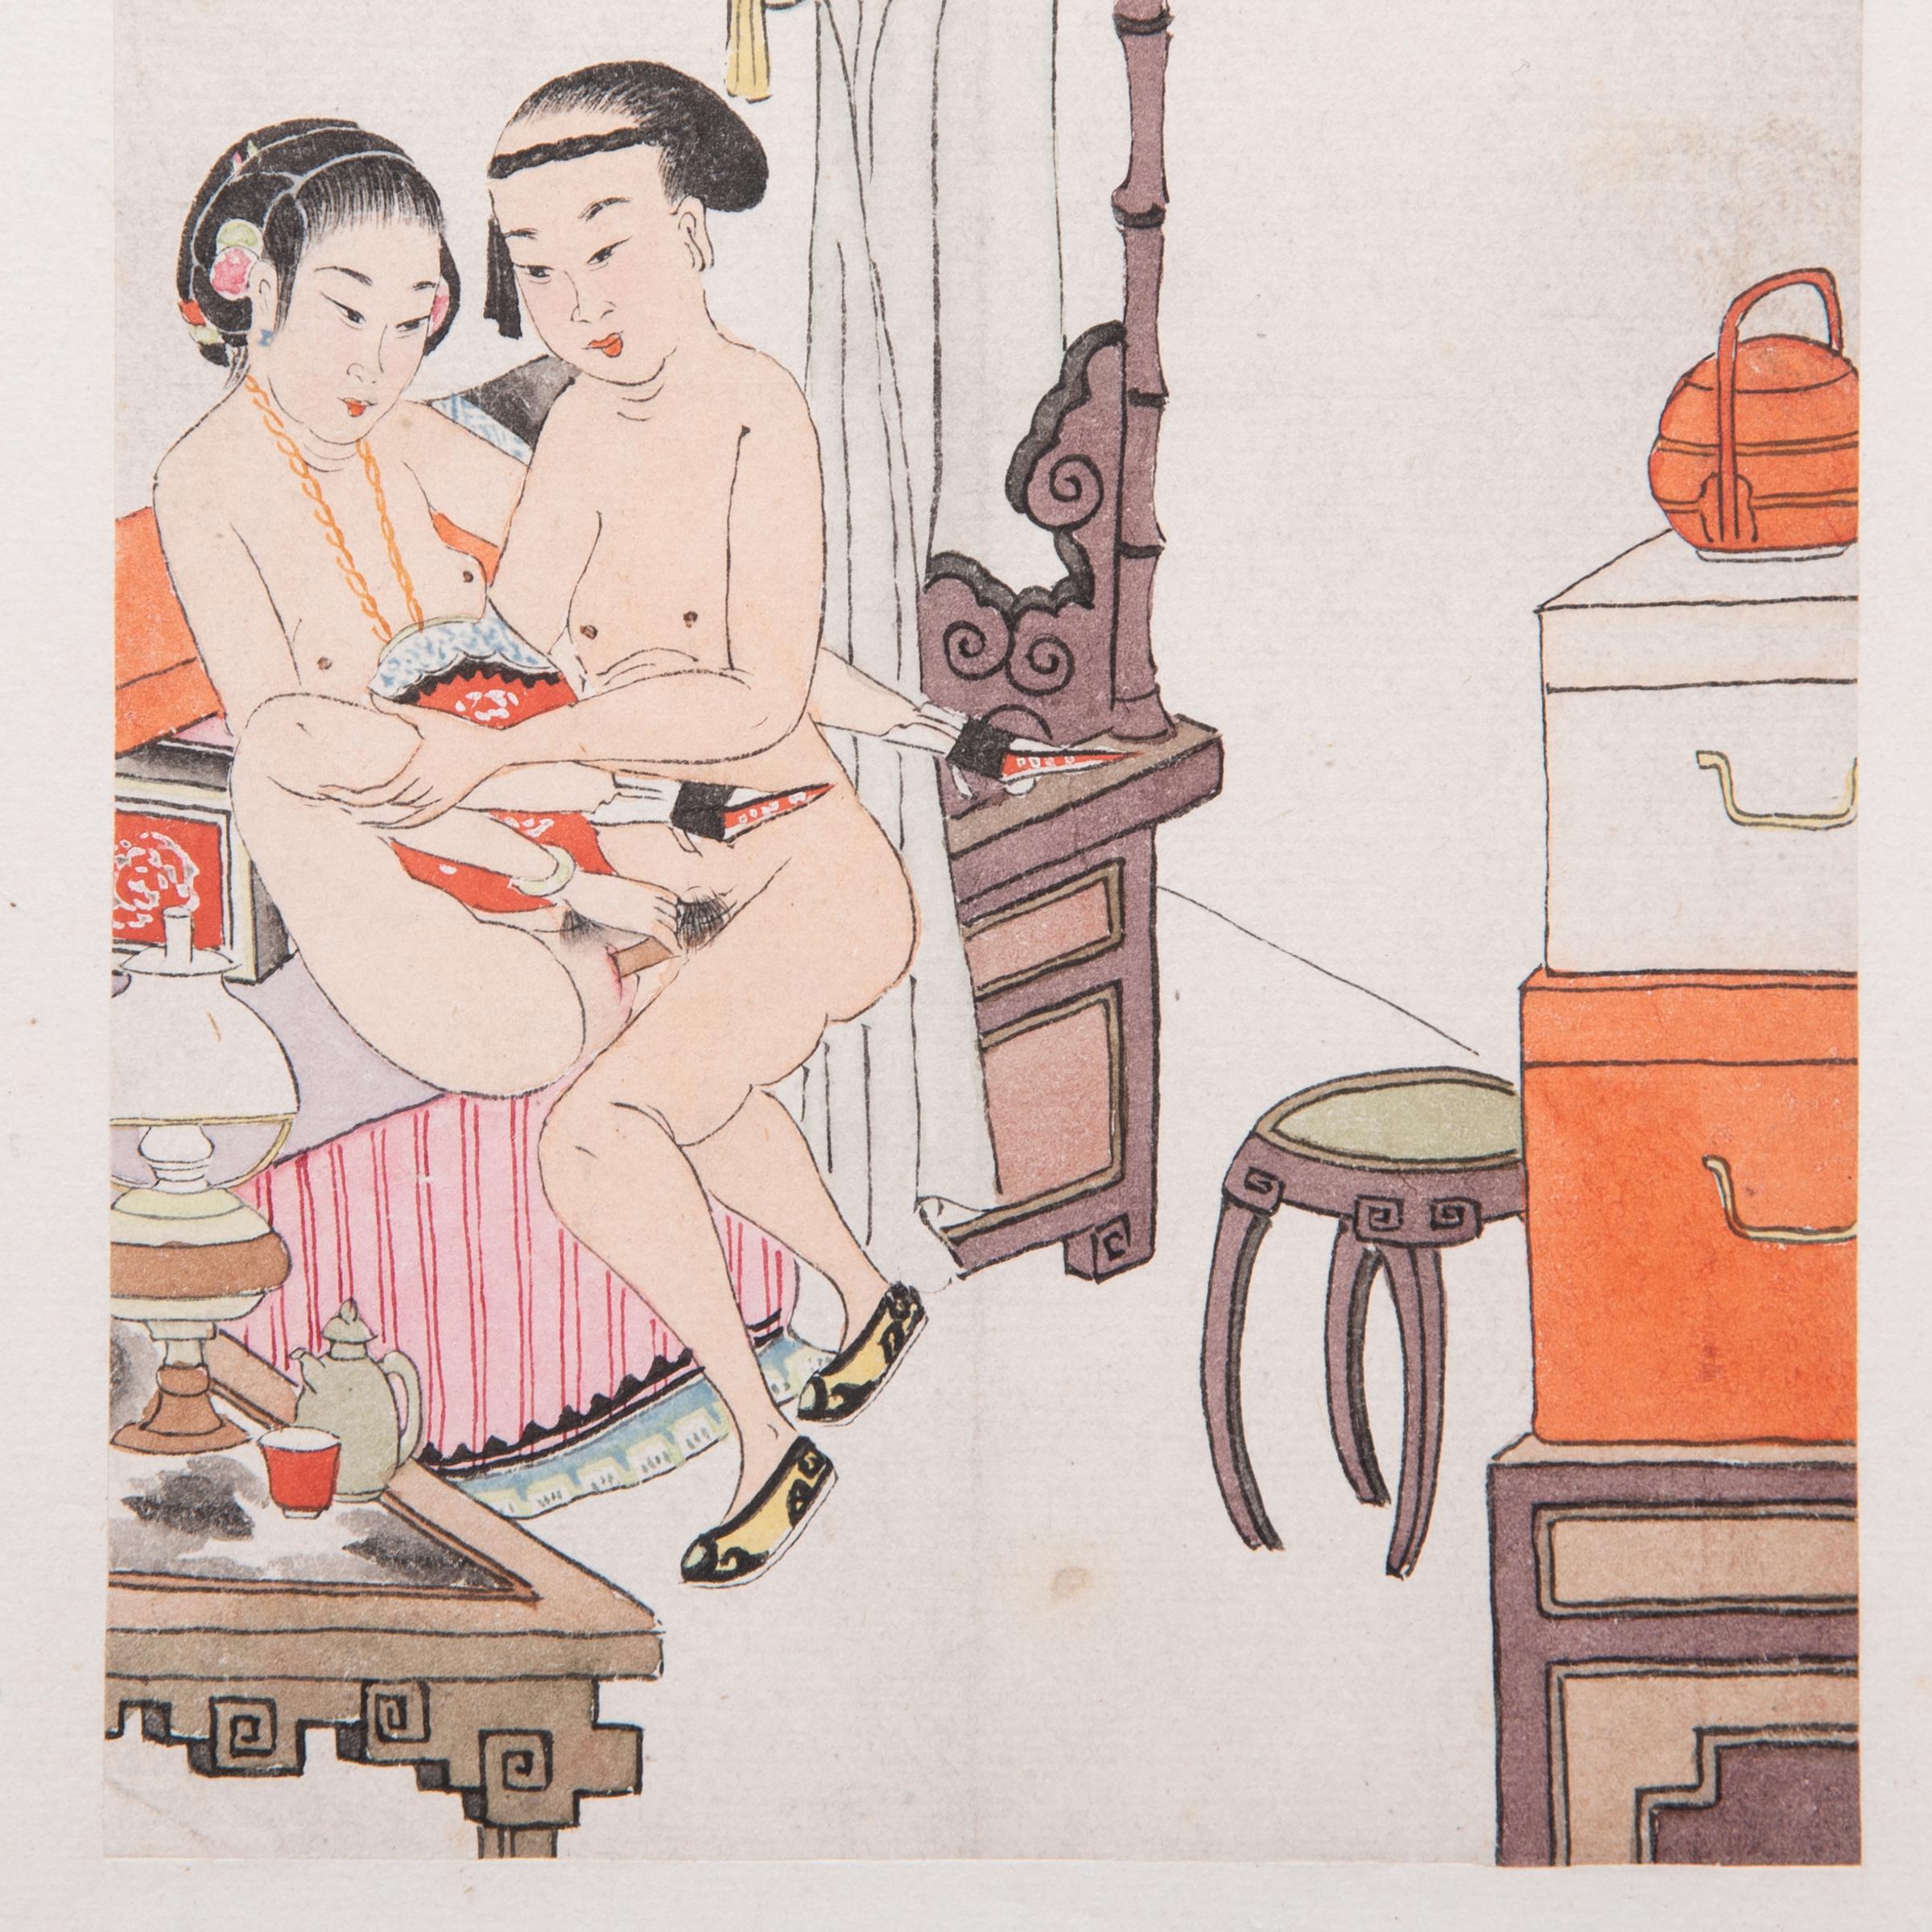 Chinese Erotic Album Leaf, c. 1850 - Qing Art by Unknown